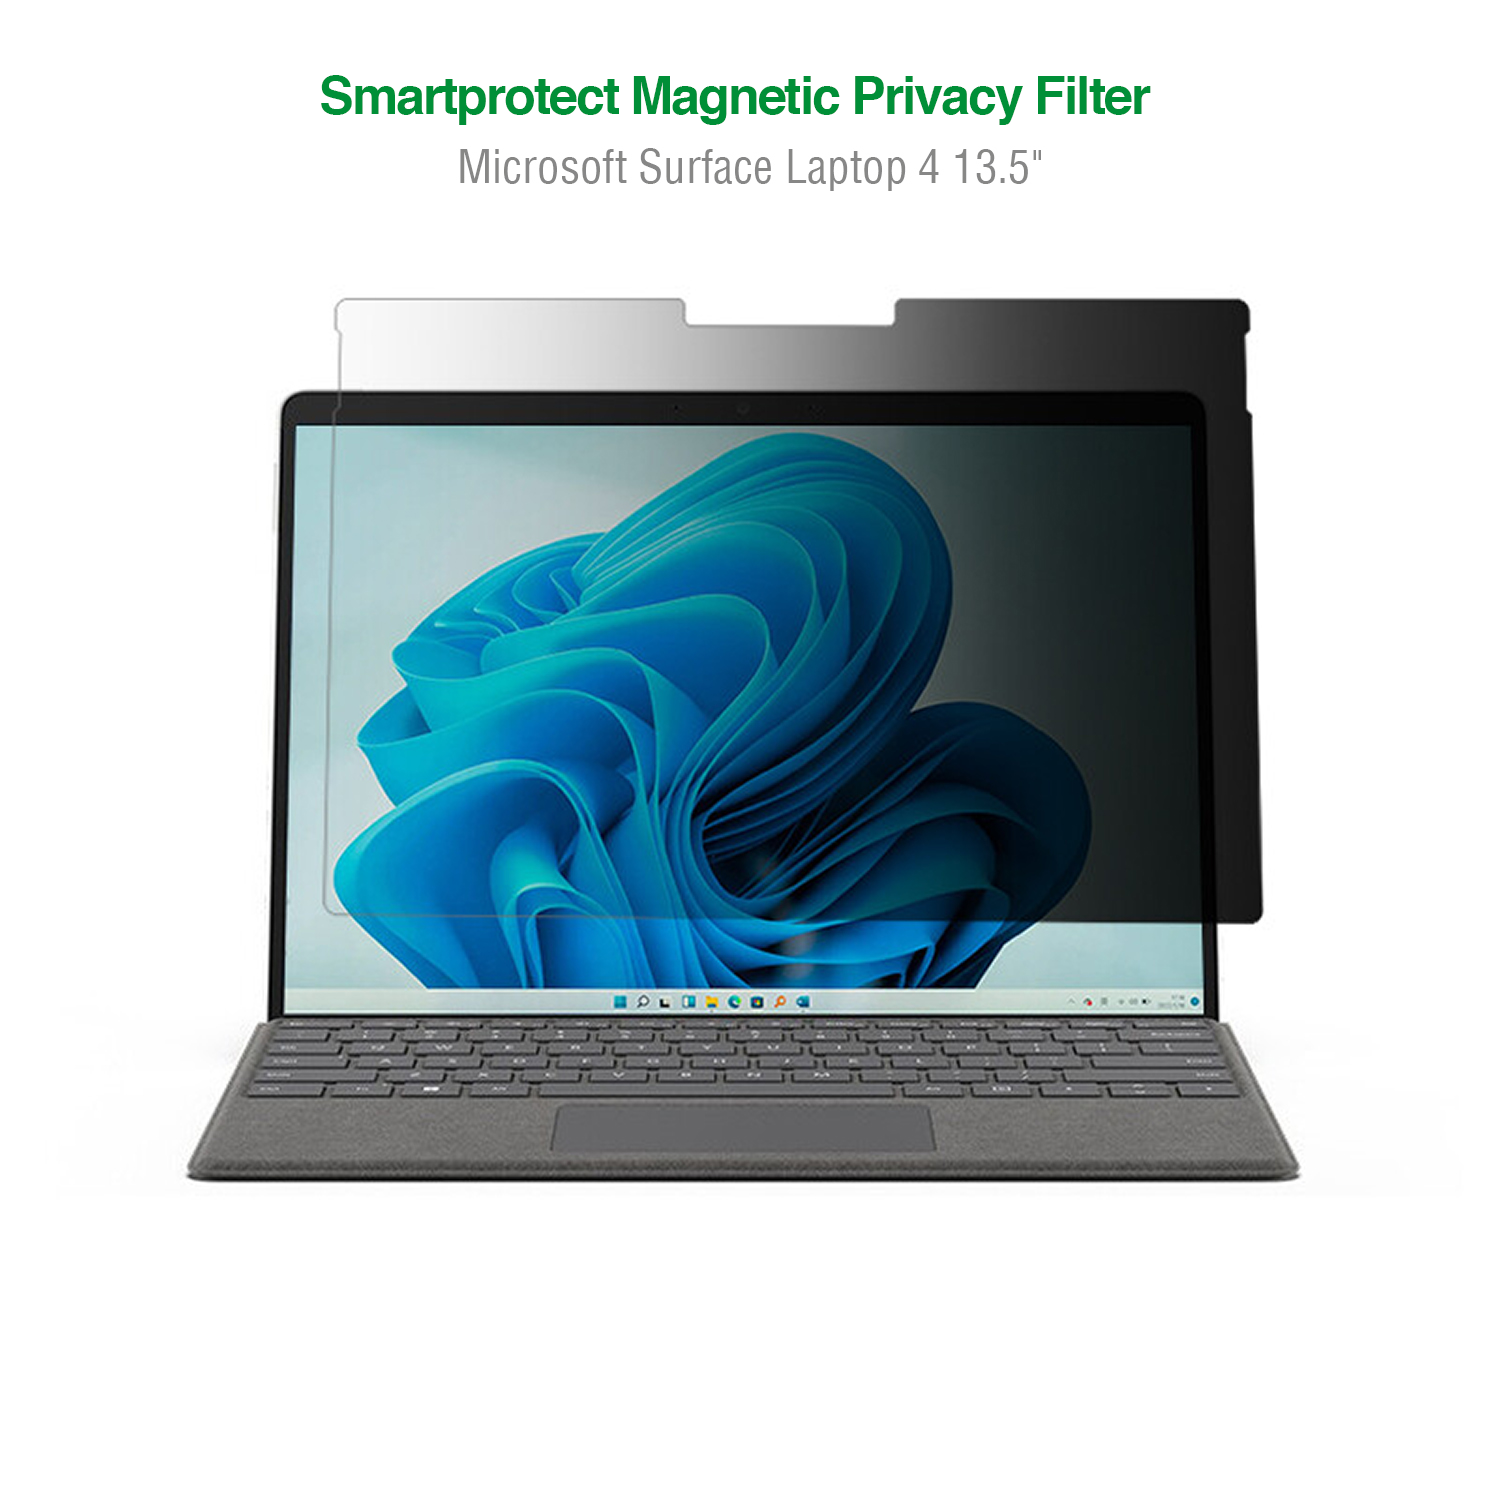 The mounting material and cleaning cloth are already included in the scope of delivery in addition to the privacy screen protector for your Microsoft Surface Laptop 4 13,5-inch.